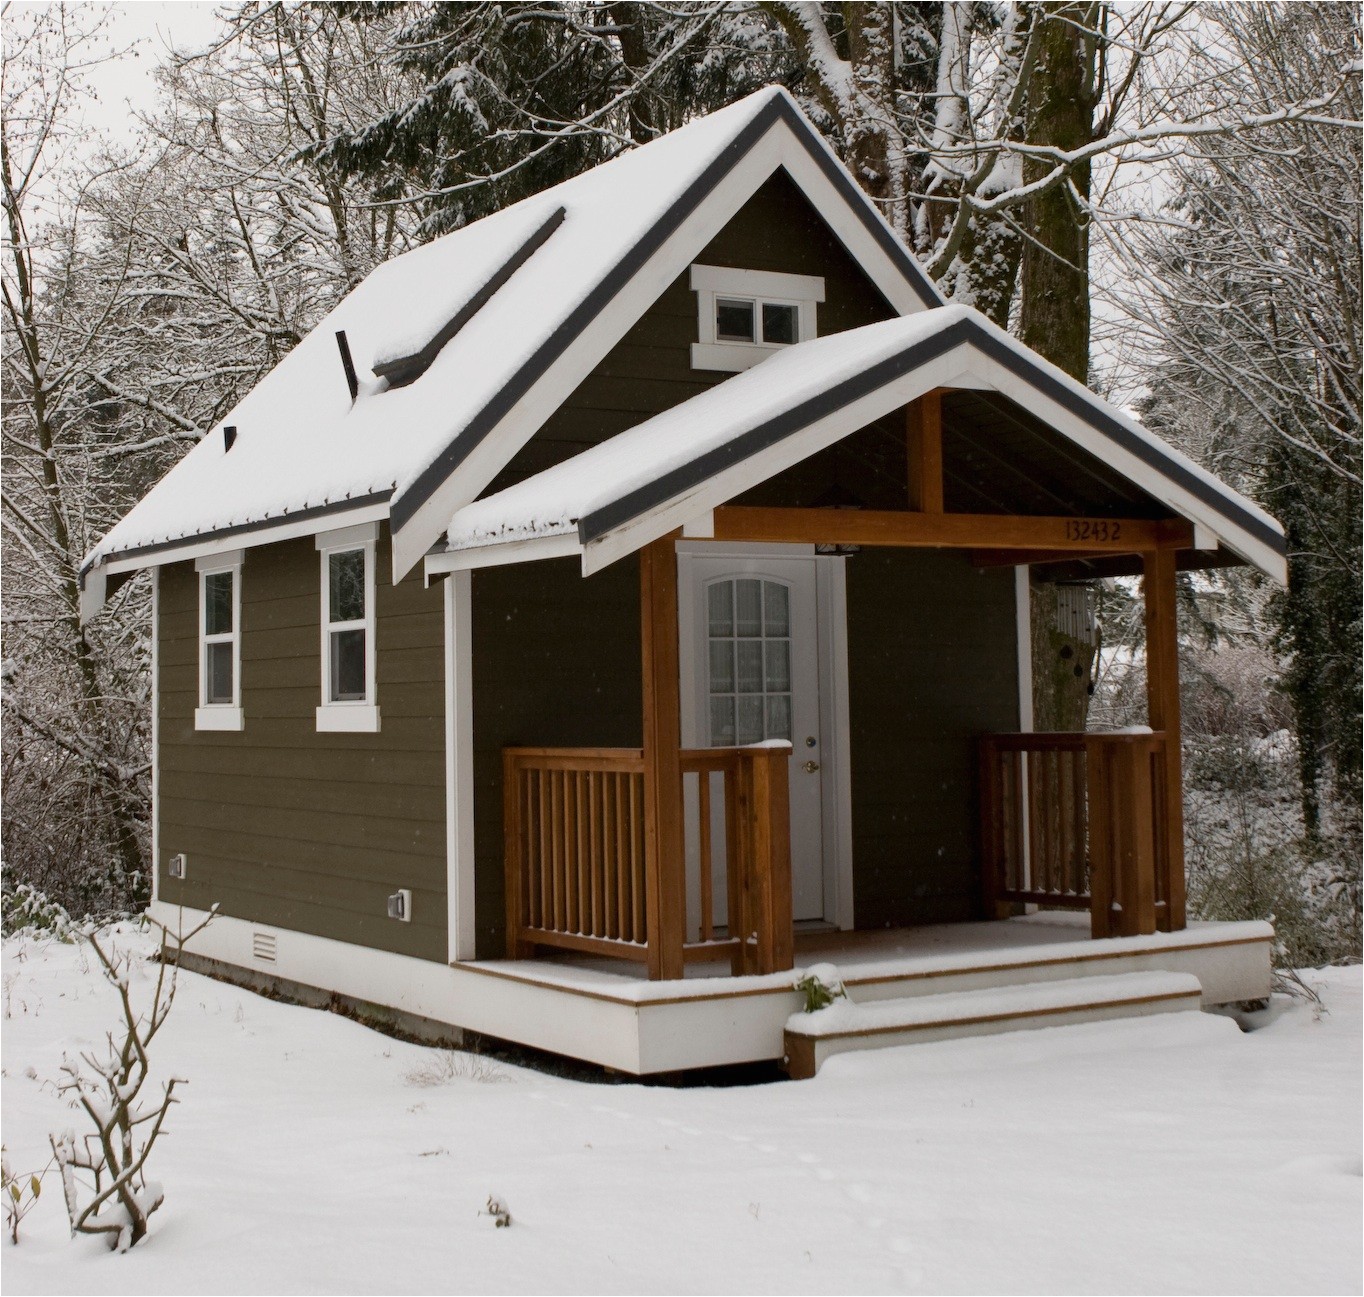 House Plans for Cabins and Small Houses the Tiny House Movement Part 1